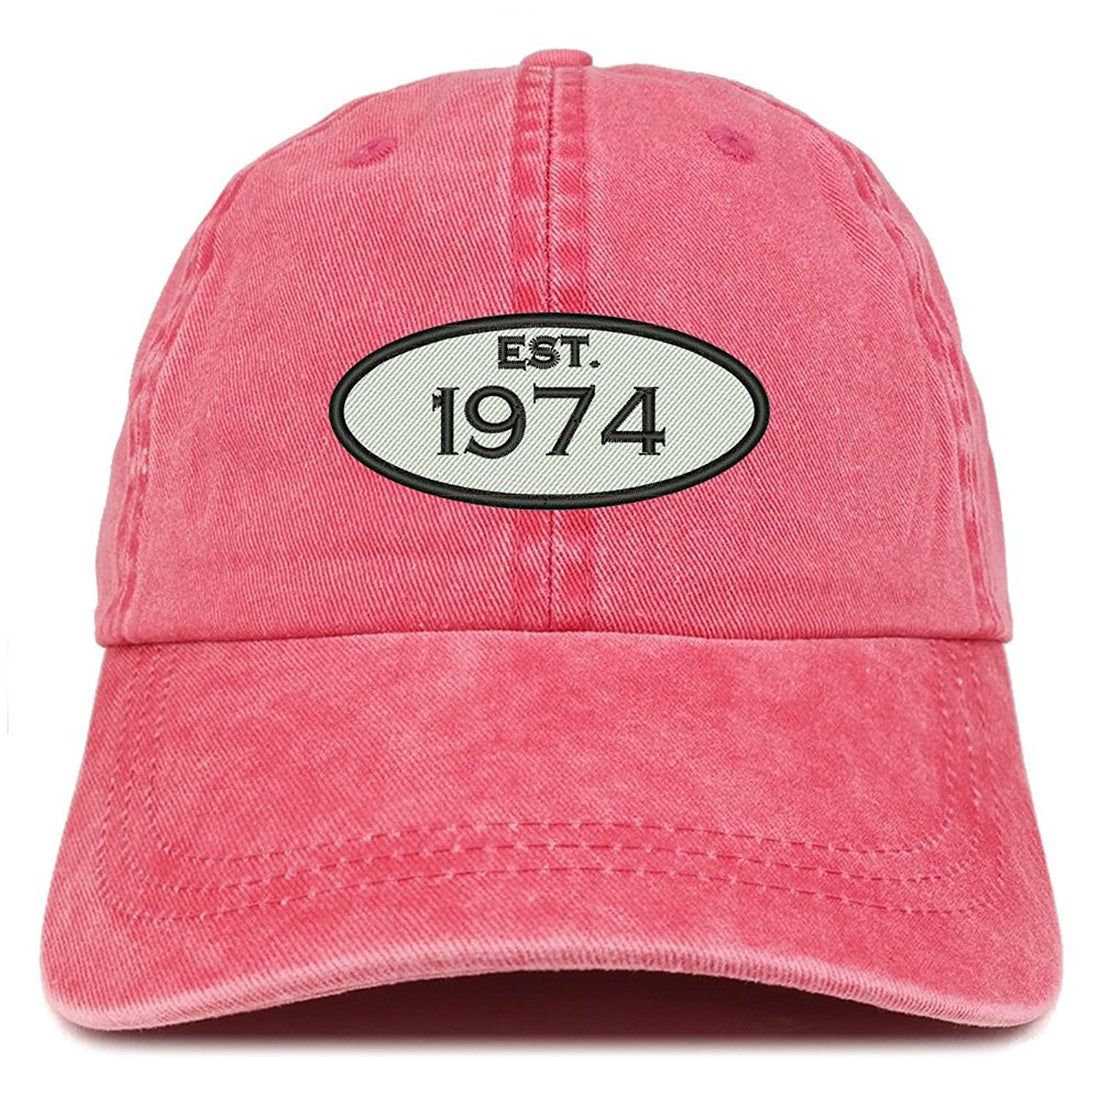 Trendy Apparel Shop Established 1974 Embroidered 45th Birthday Gift Pigment Dyed Washed Cotton Cap